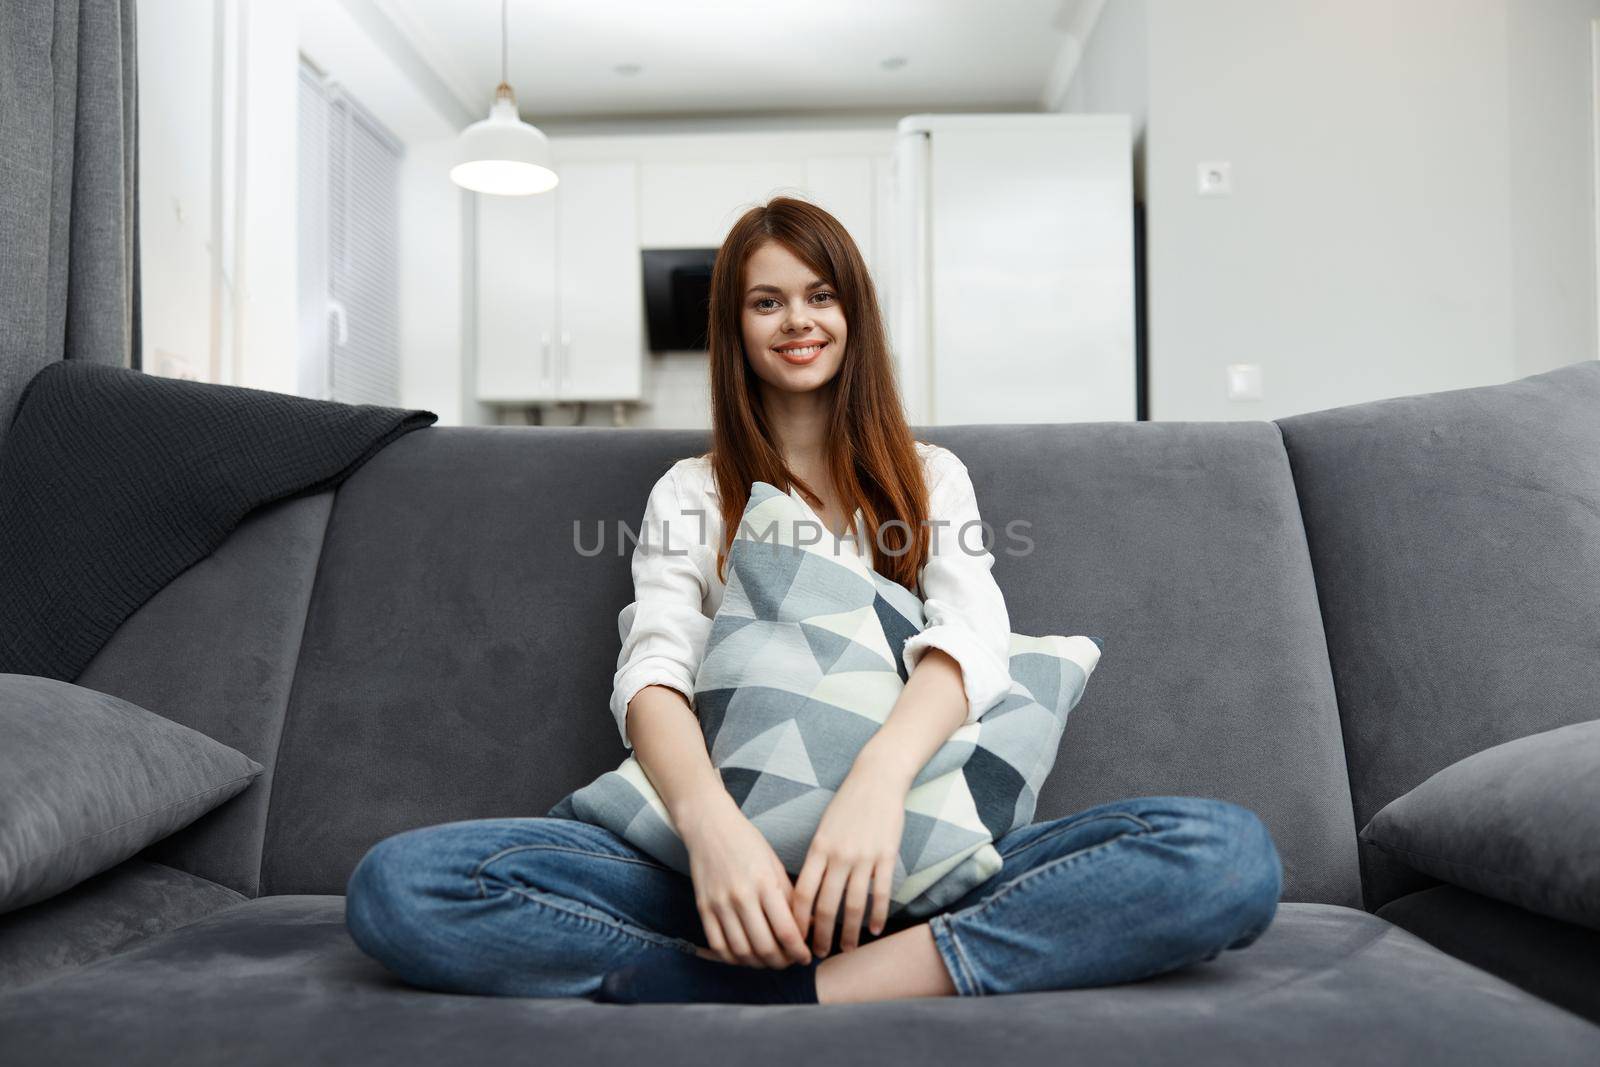 woman sitting on the couch in her free time with a pillow in her hands rest by SHOTPRIME